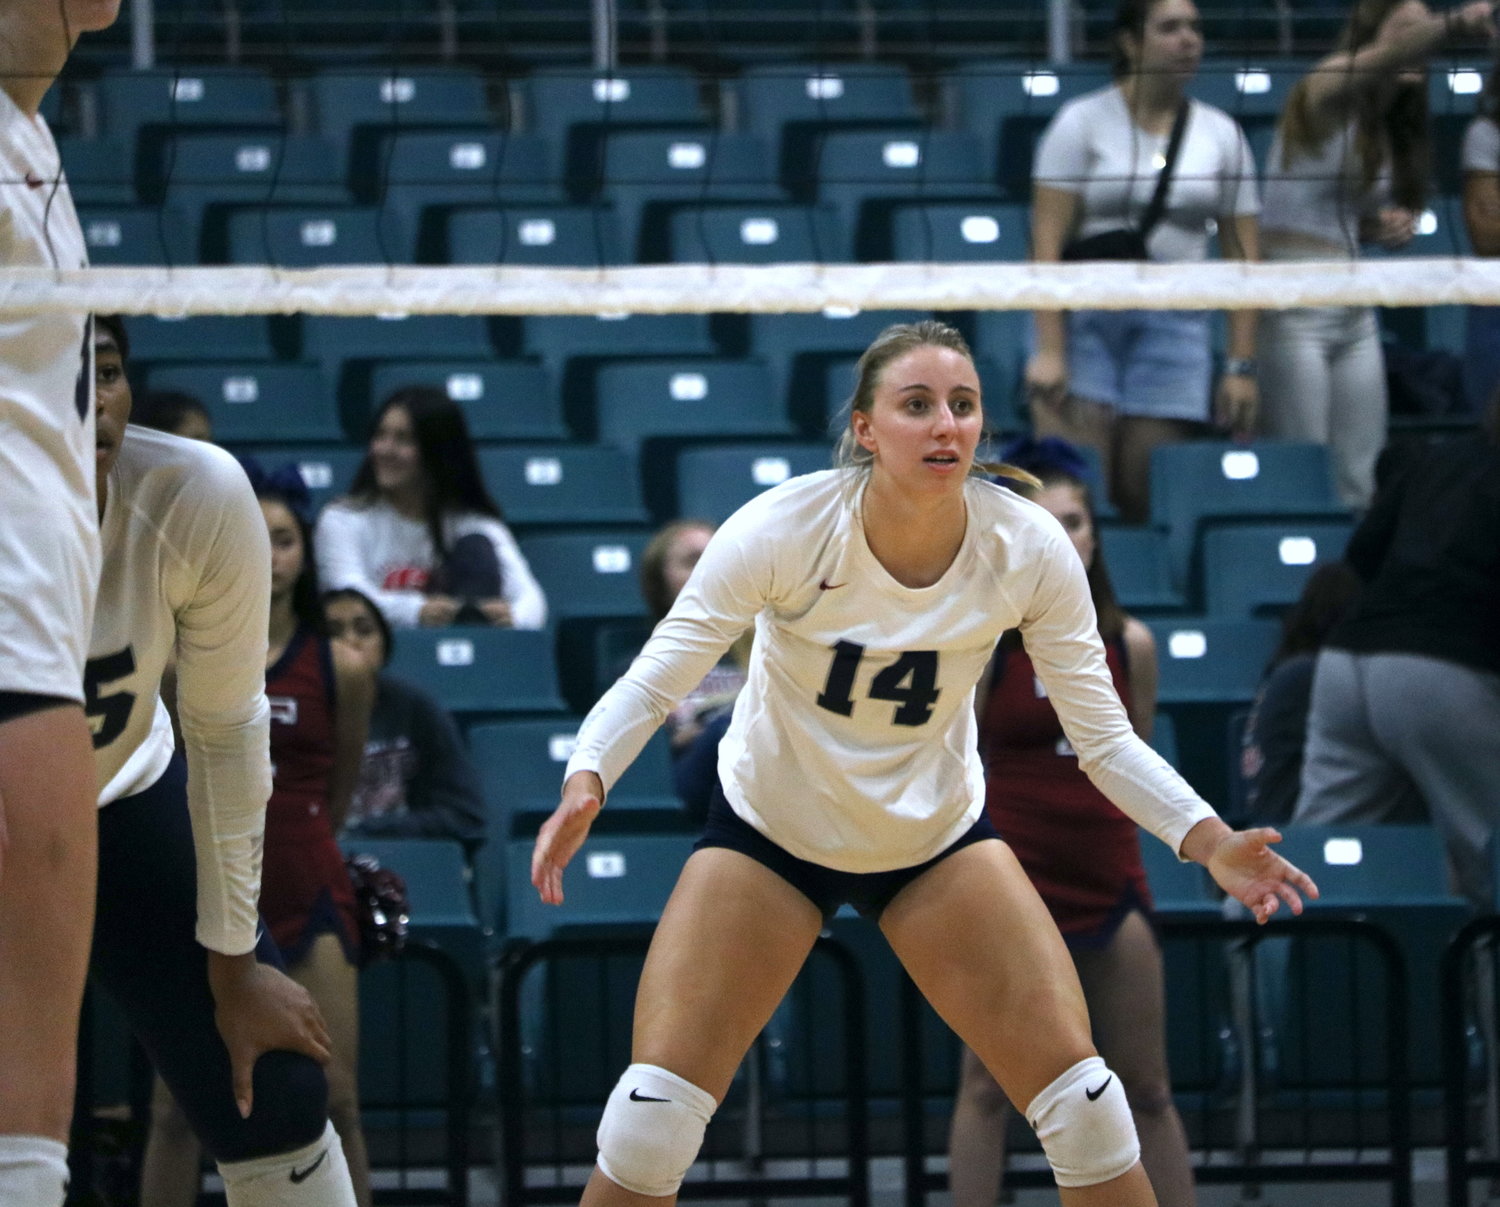 Skylar Skrabanek prepares for an incoming serve during Tuesday’s bi-district playoff game between Tompkins and Fort Bend Austin at the Merrell Center.